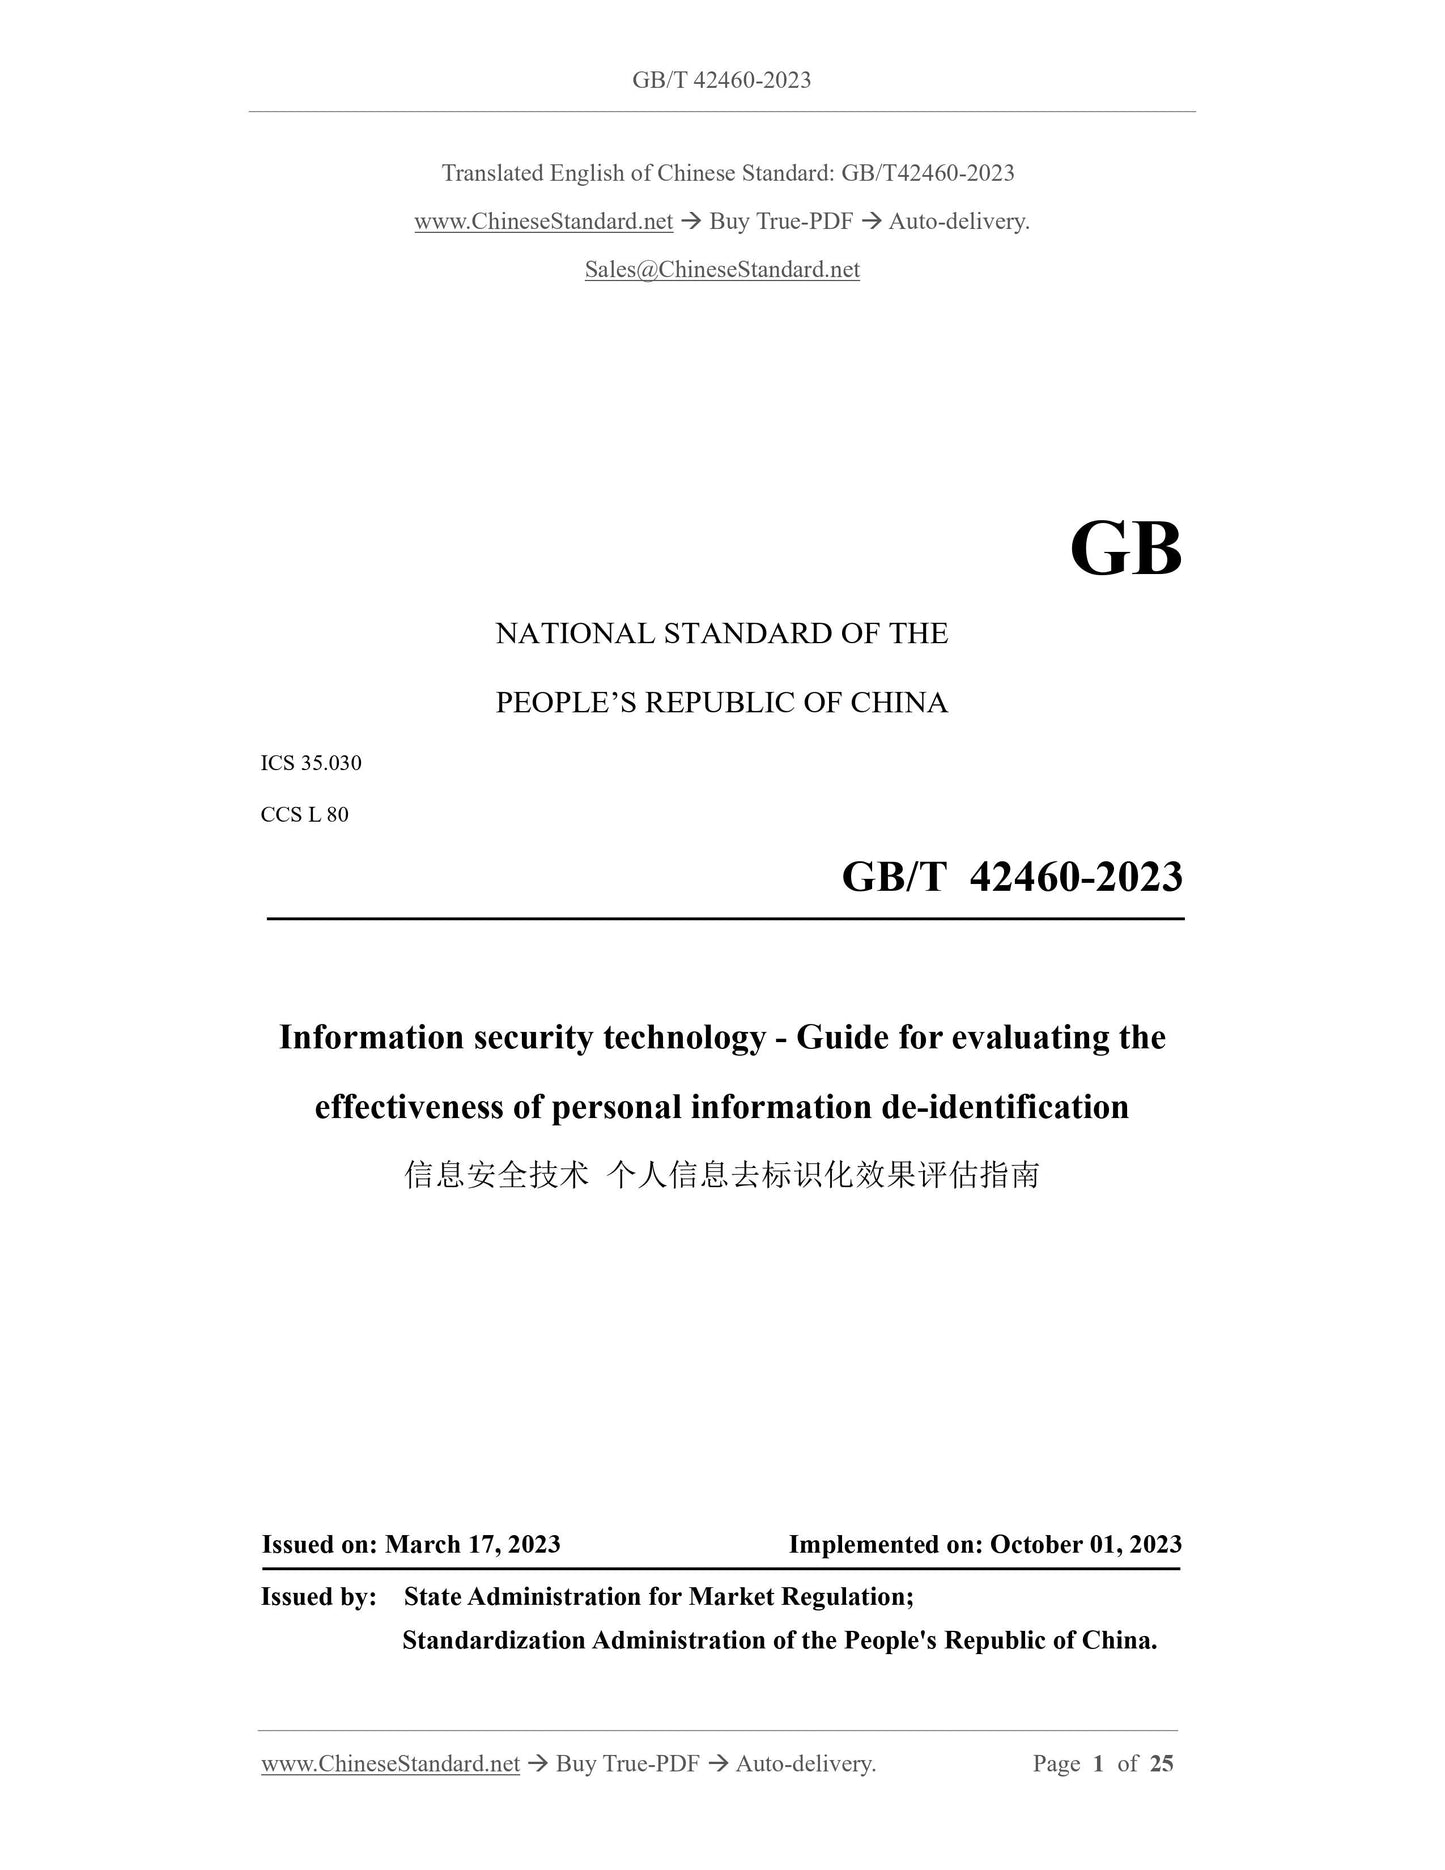 GB/T 42460-2023 Page 1